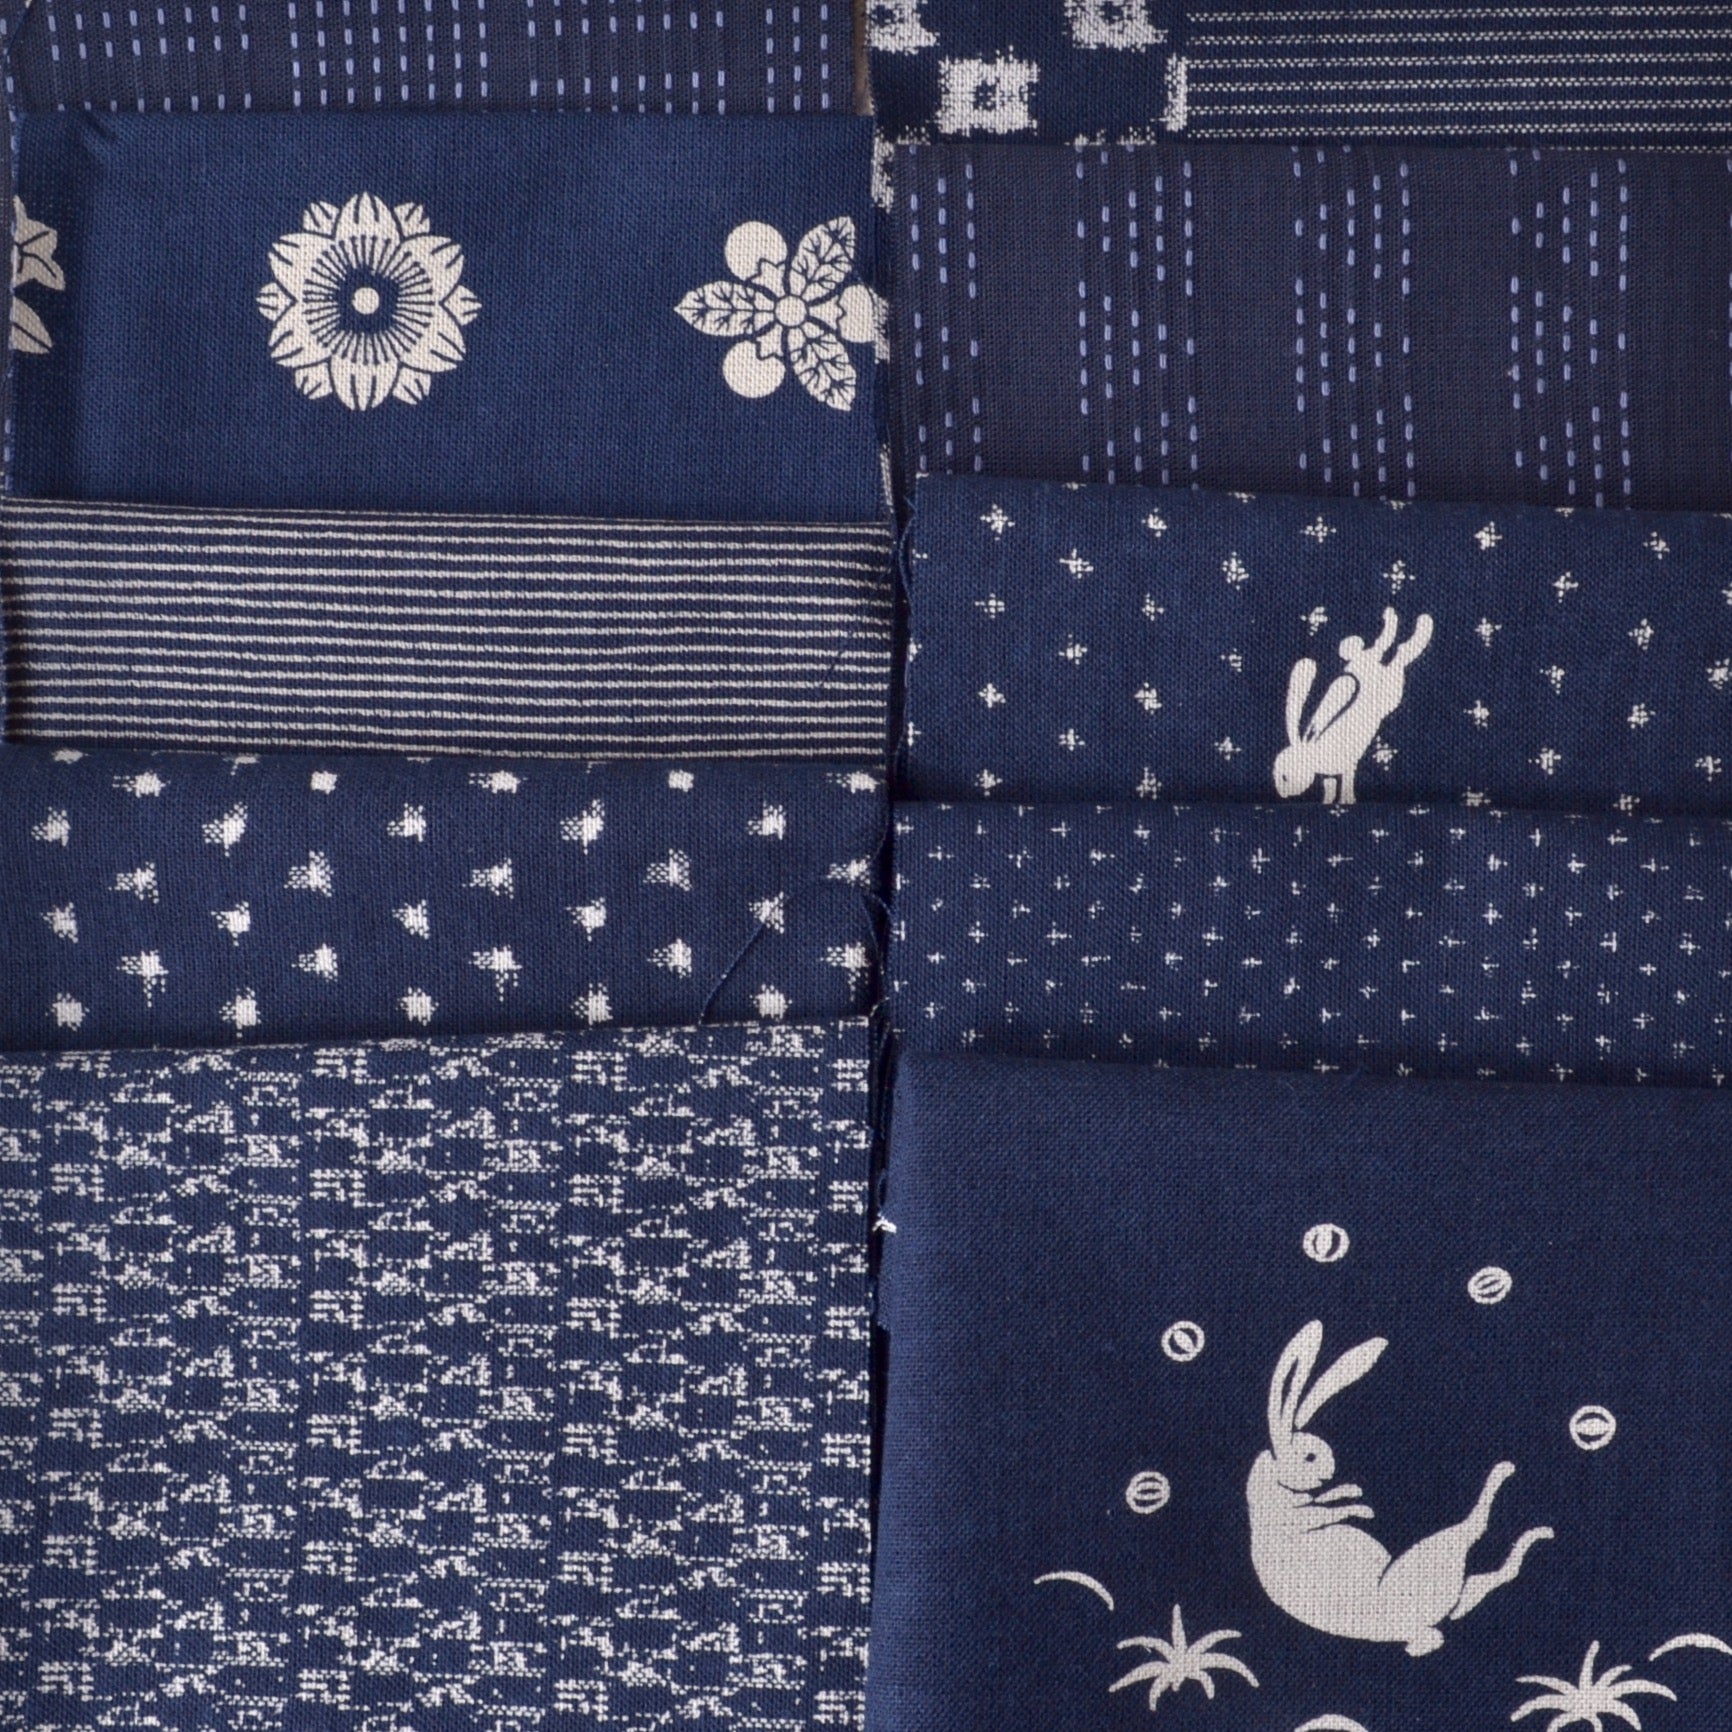 Japanese momen fabric for boro, mending, applique, sewing